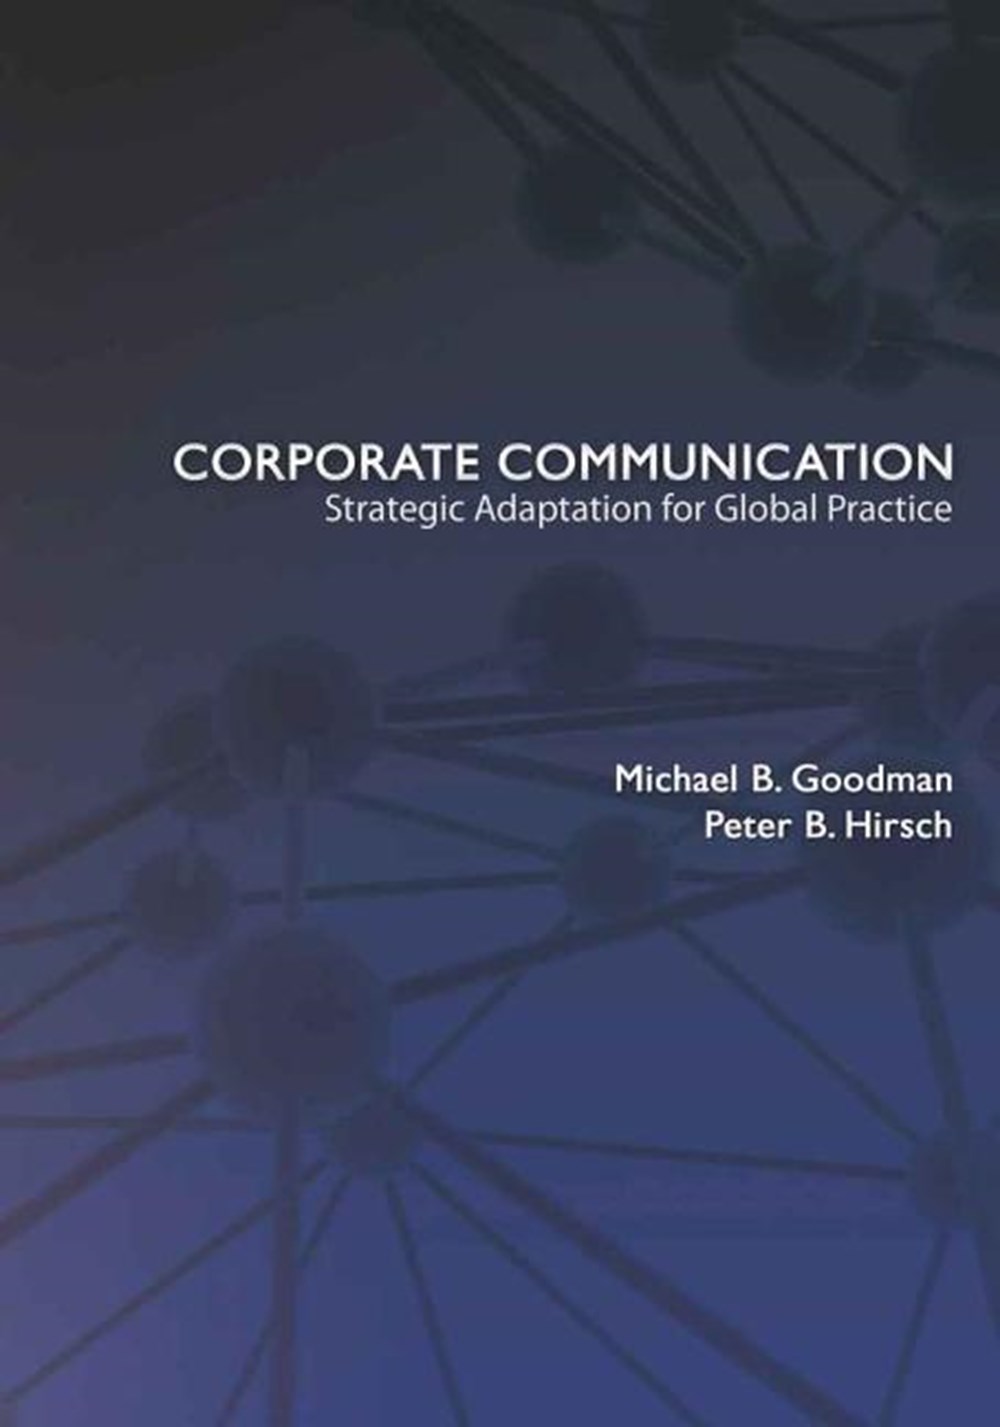 Corporate Communication: Strategic Adaptation for Global Practice